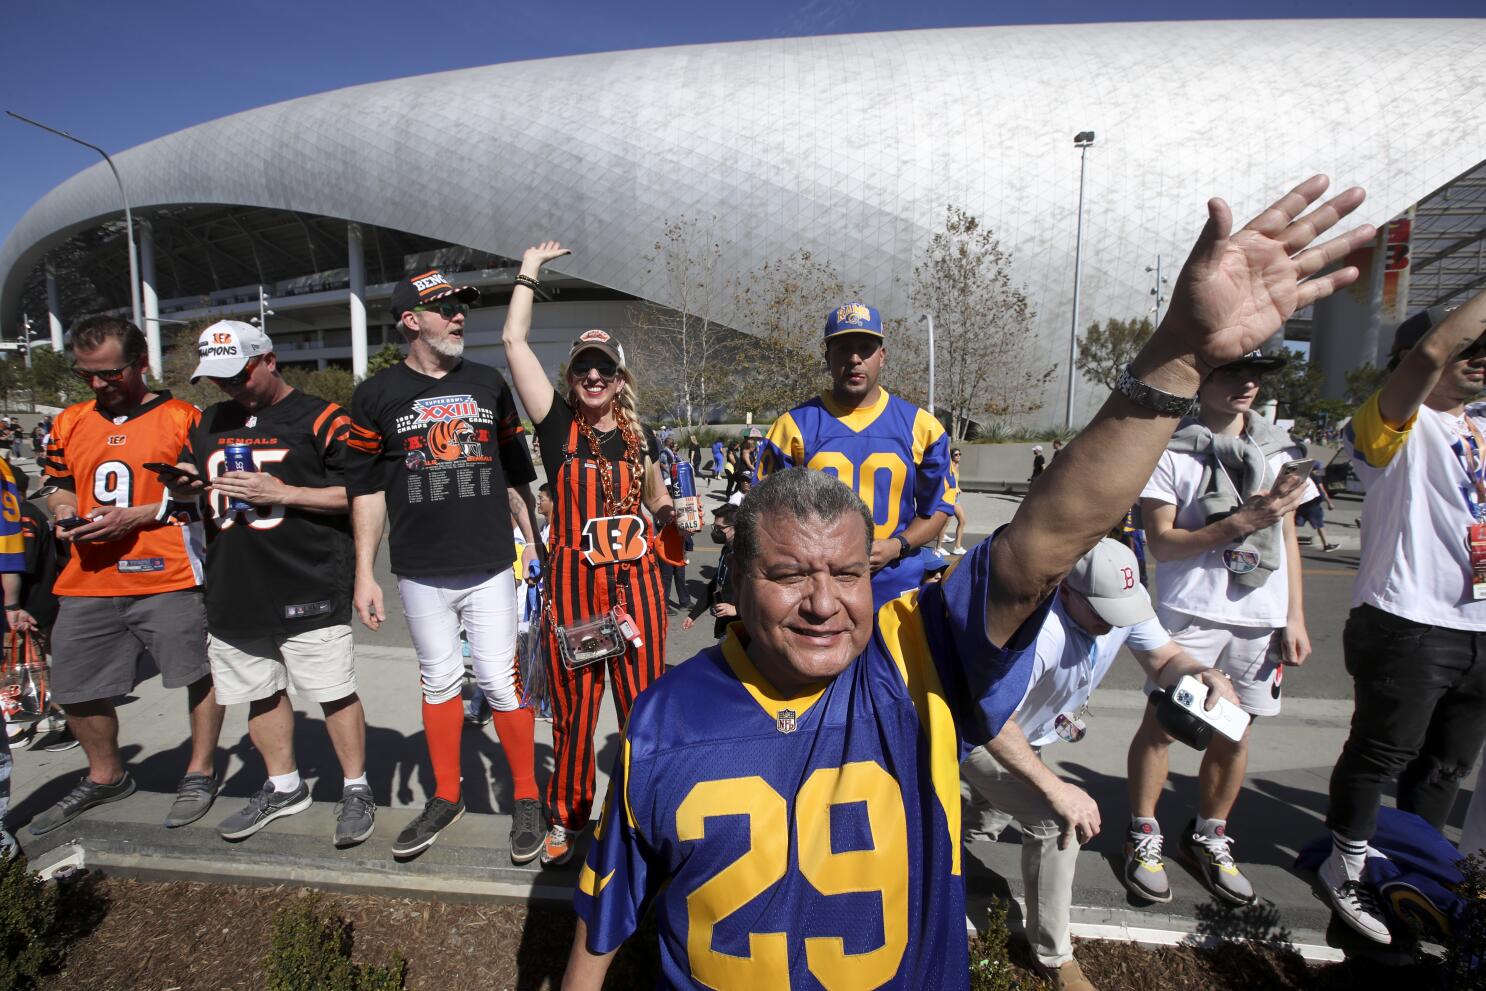 NFL's clear-bag policy has Rams' female fans on defensive